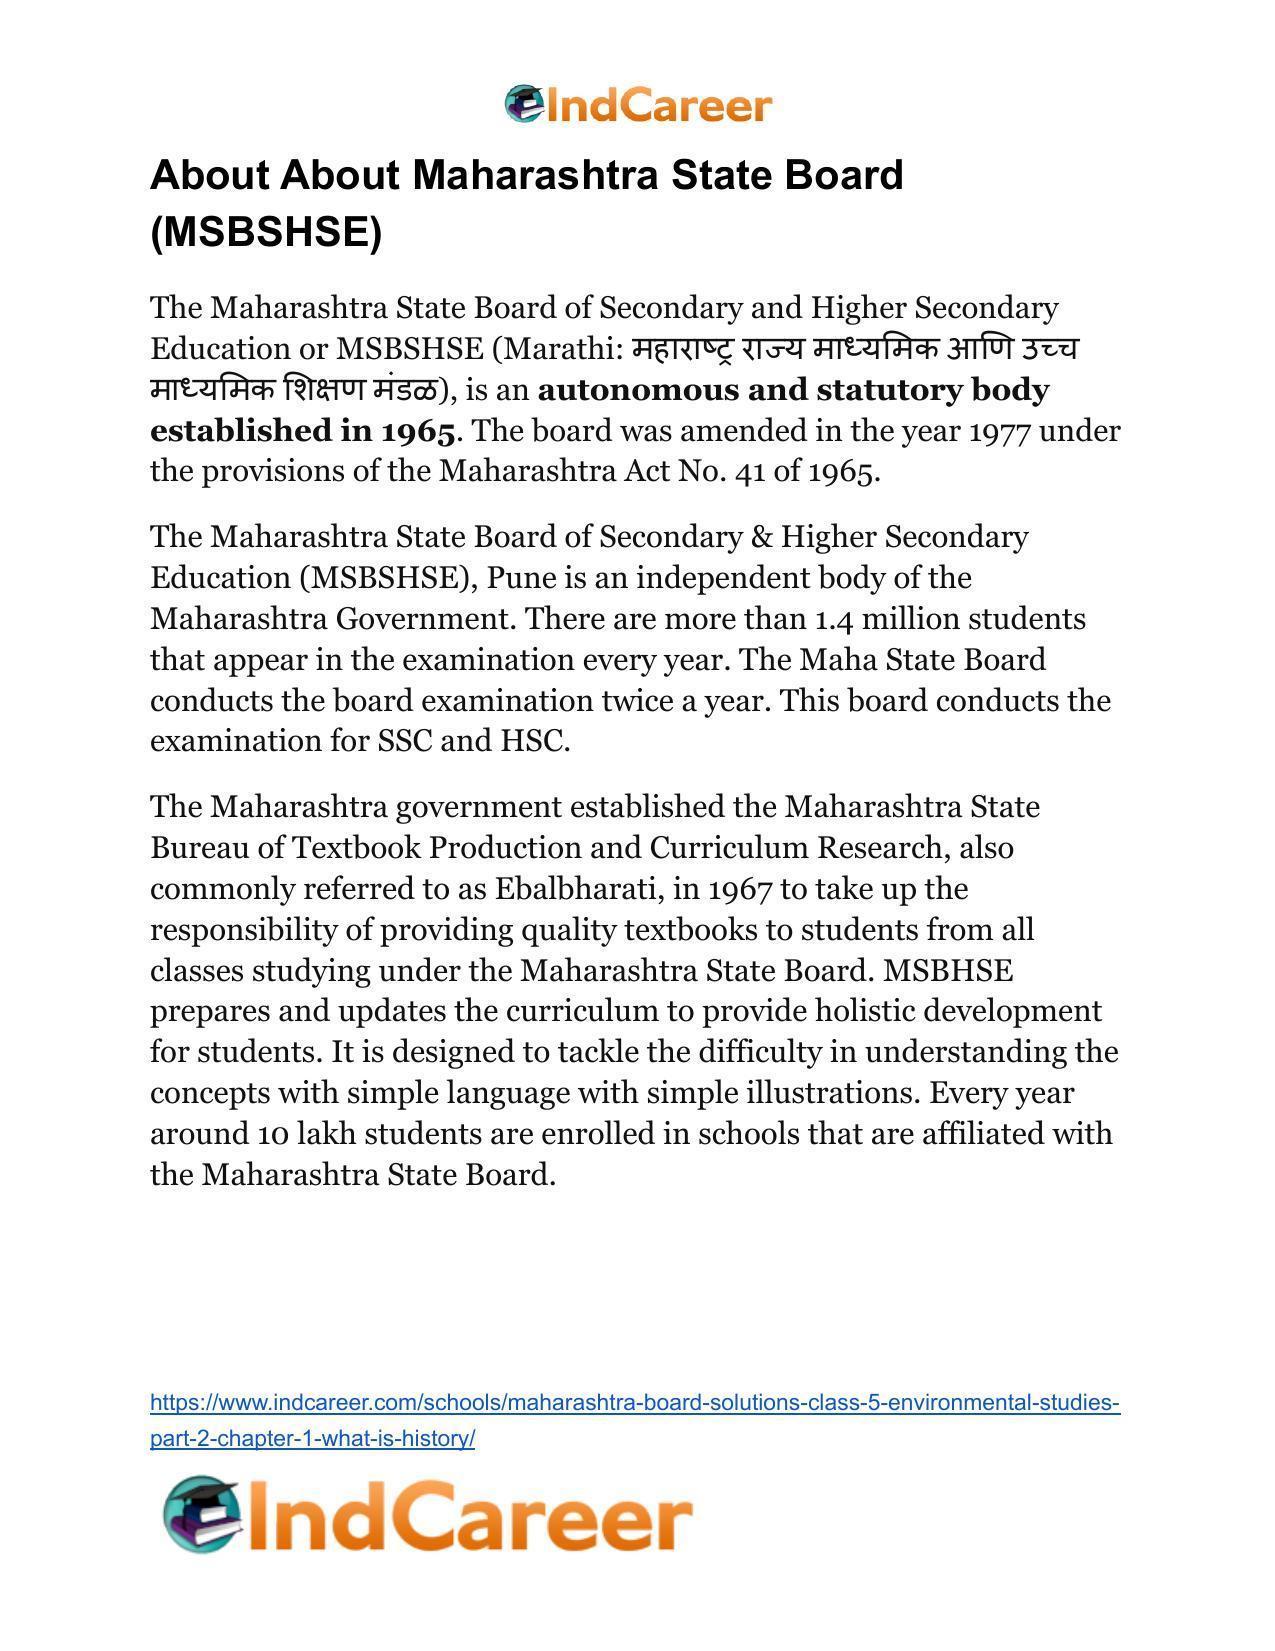 Maharashtra Board Solutions Class 5-Environmental Studies (Part 2): Chapter 1- What is History? - Page 19